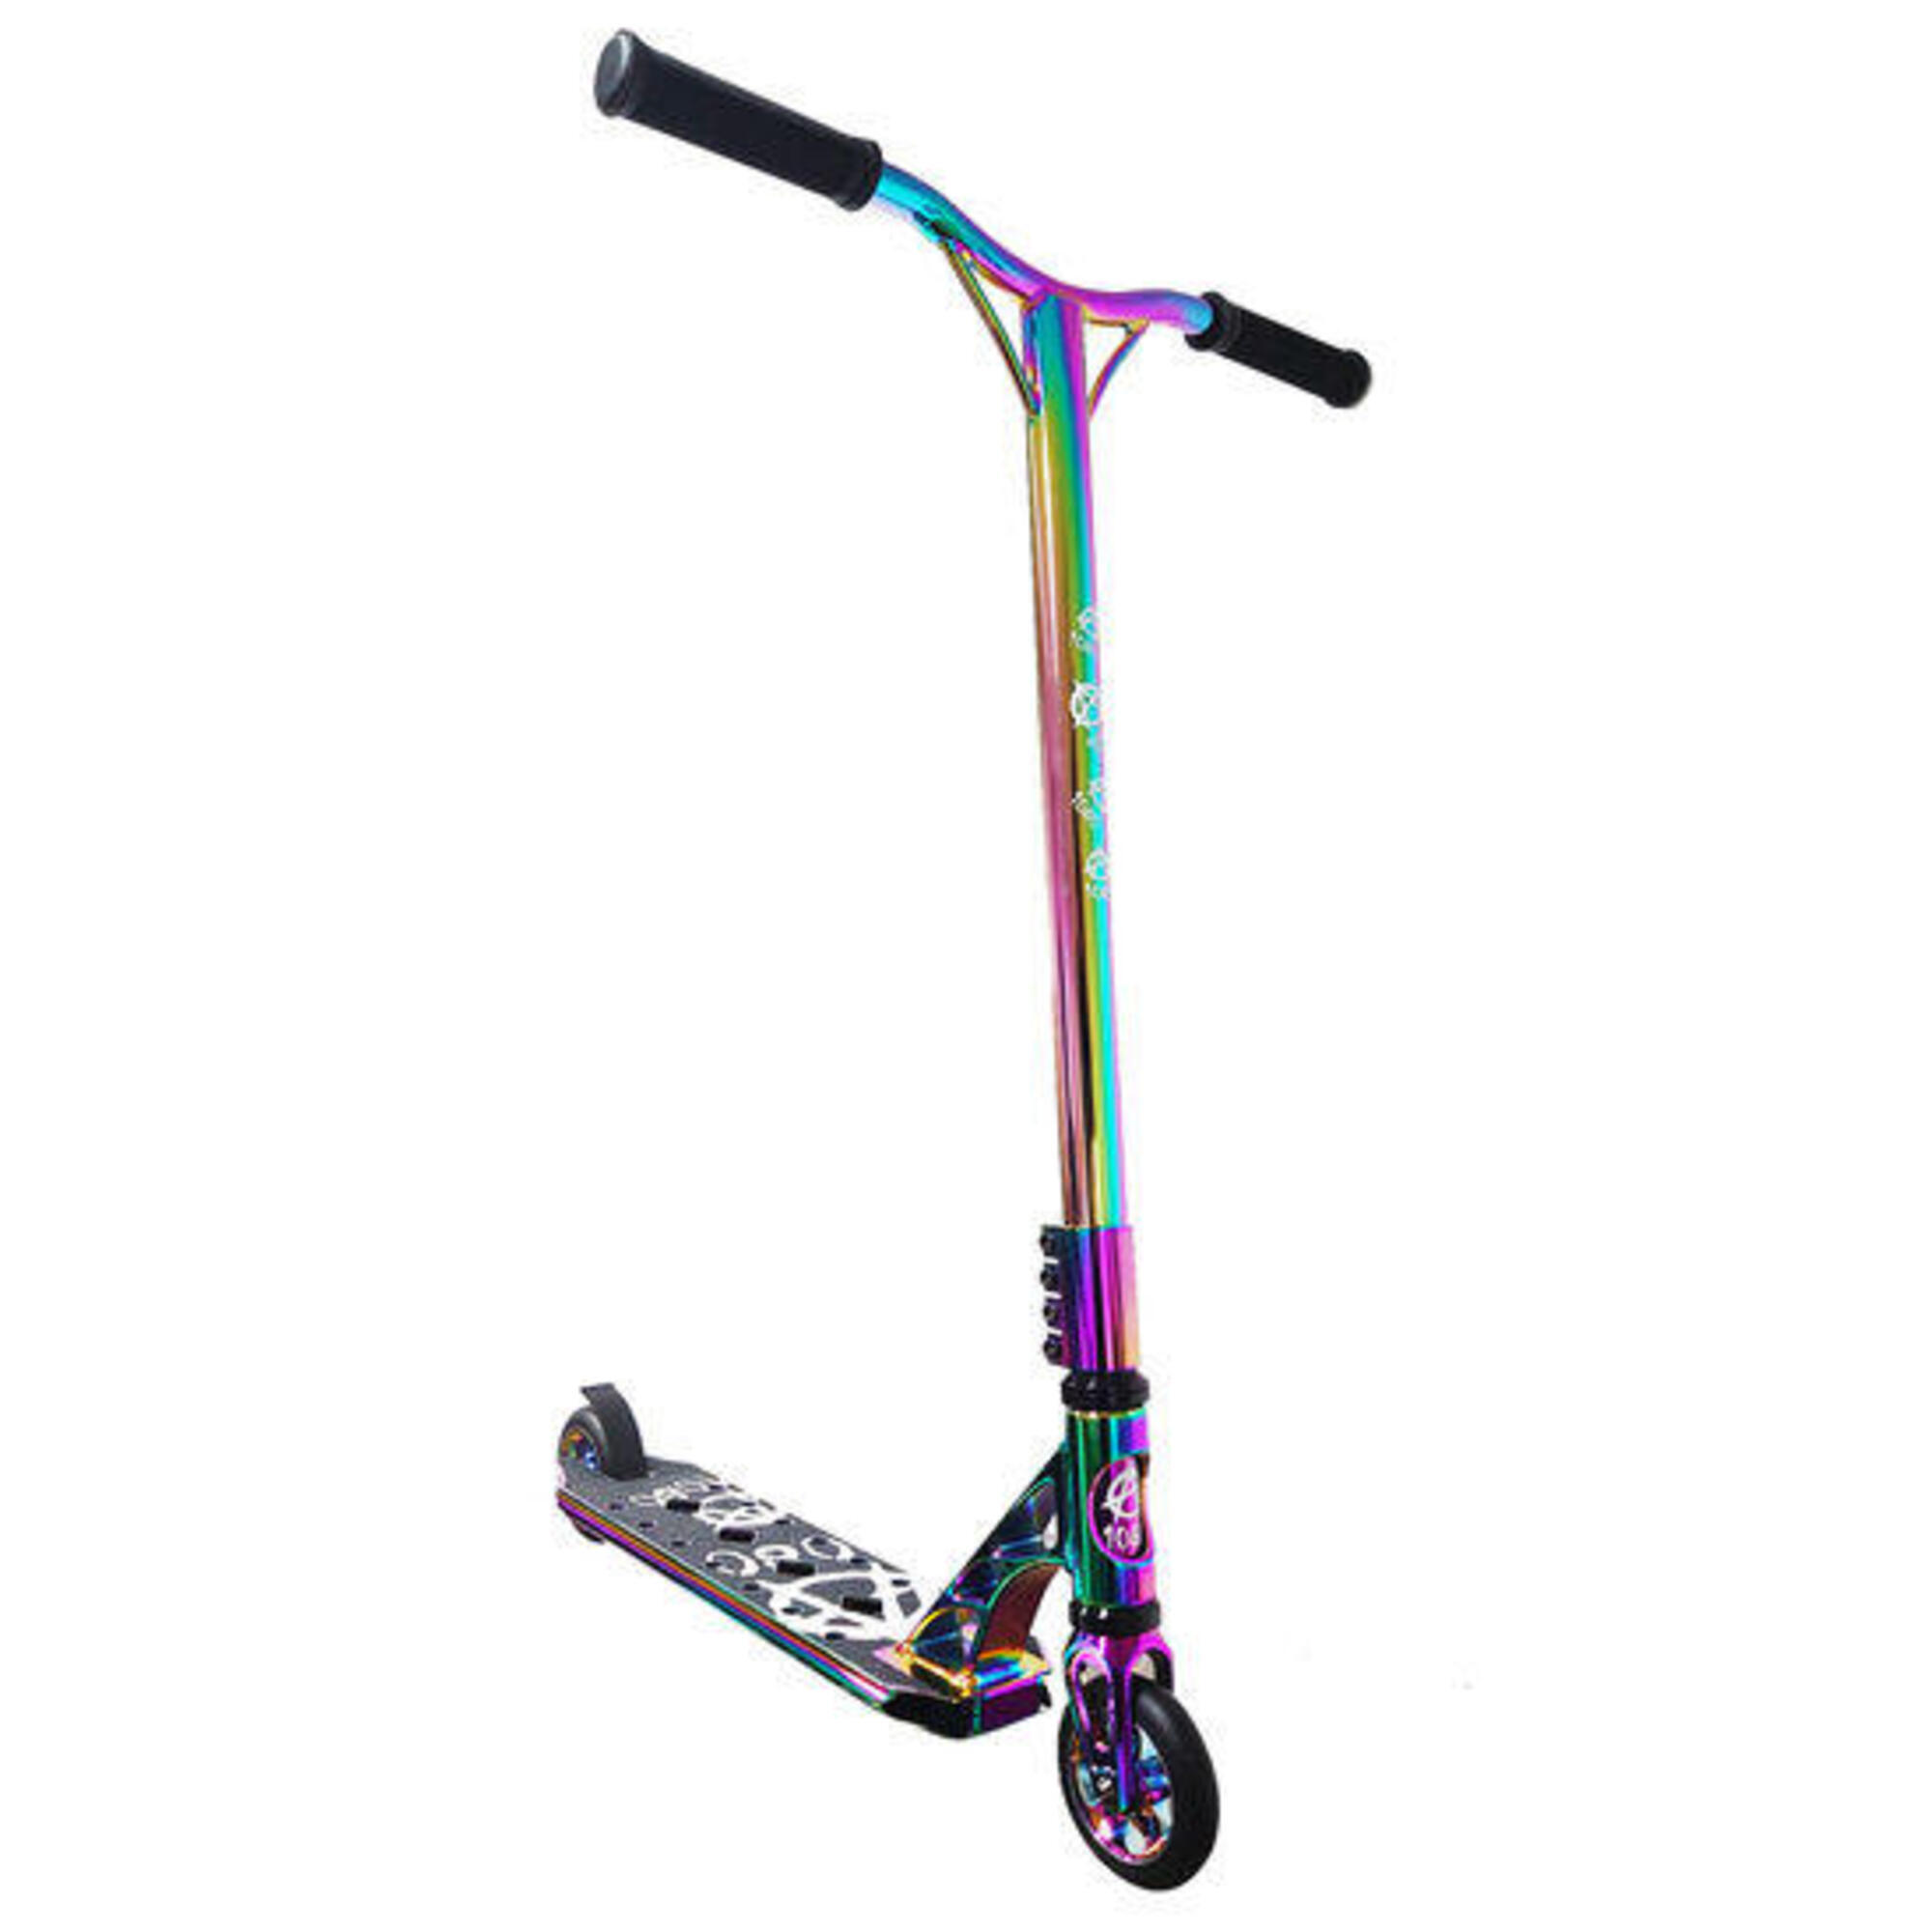 1080 NeoChrome+ Push Stunt Scooter, Limited Edition - Neo Chrome Jet Fuel 1/5